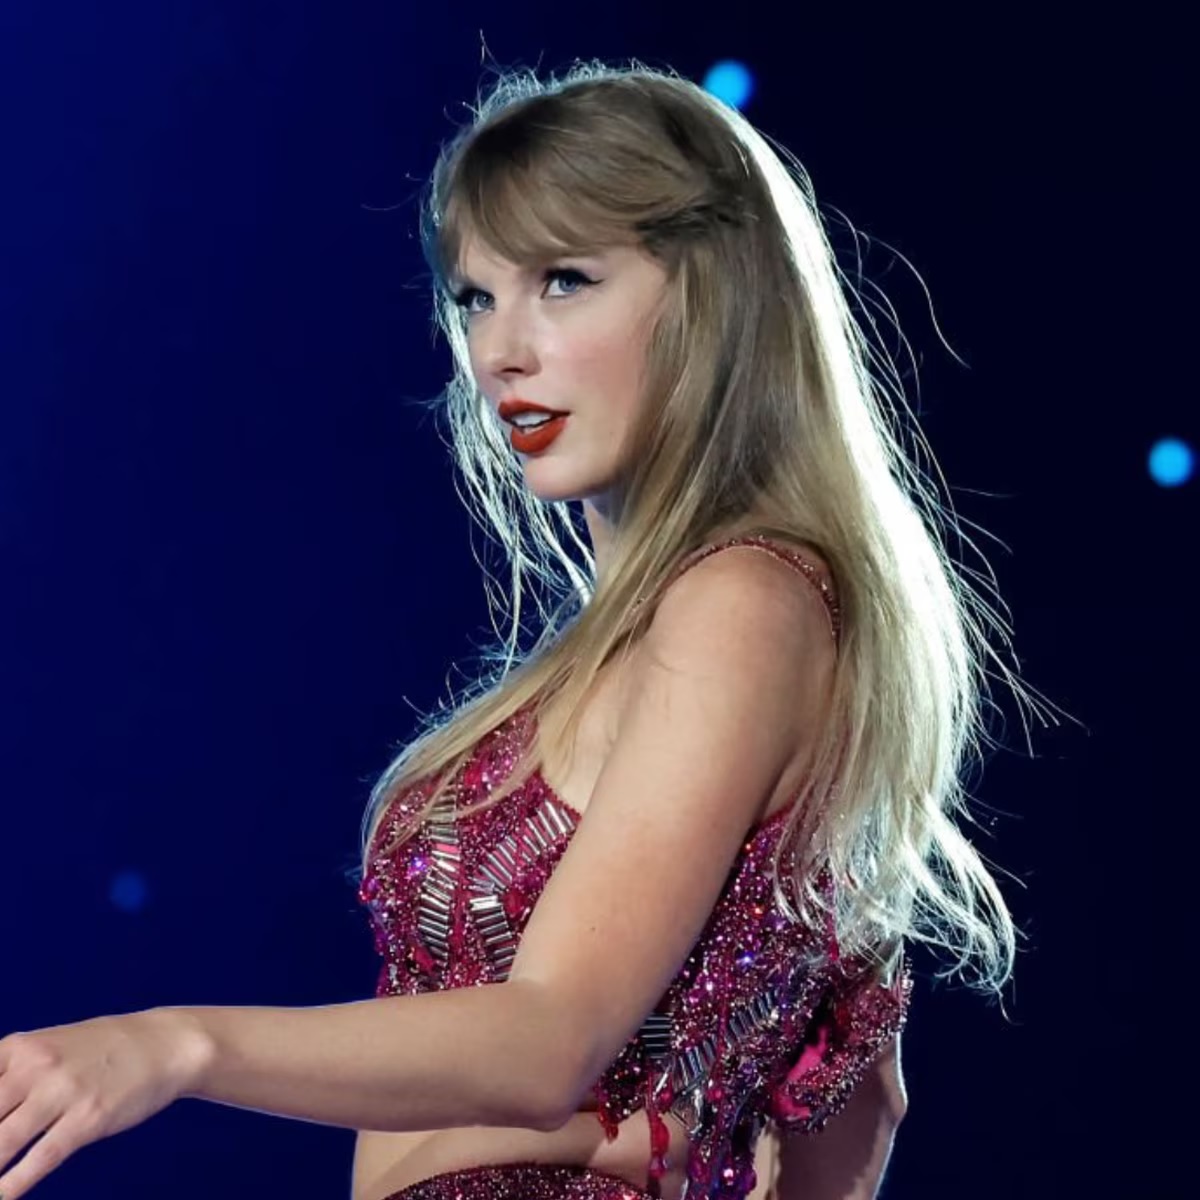 Woman who spent $1,400 on Taylor Swift Eras tour tickets gets duped